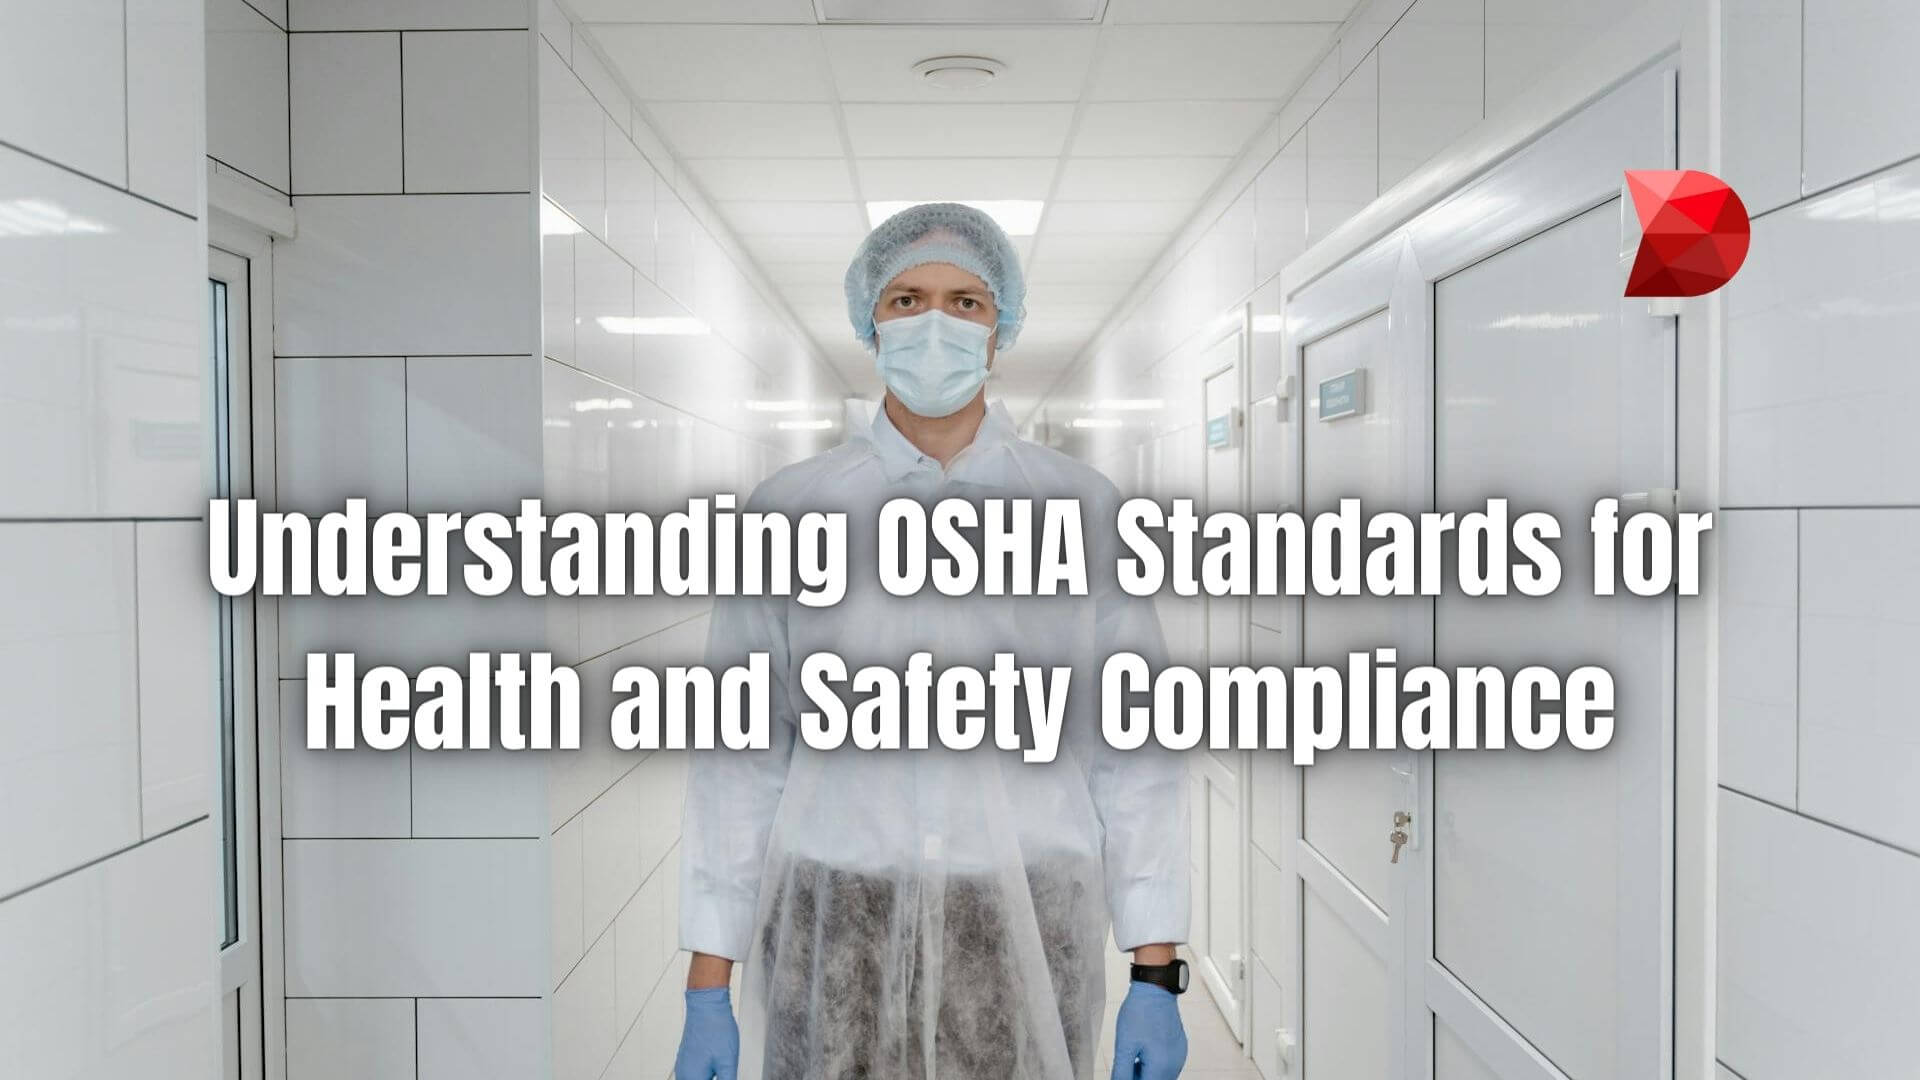 Ensure workplace safety with our expertly curated list of OSHA standards. Stay compliant and prioritize health and safety effortlessly.